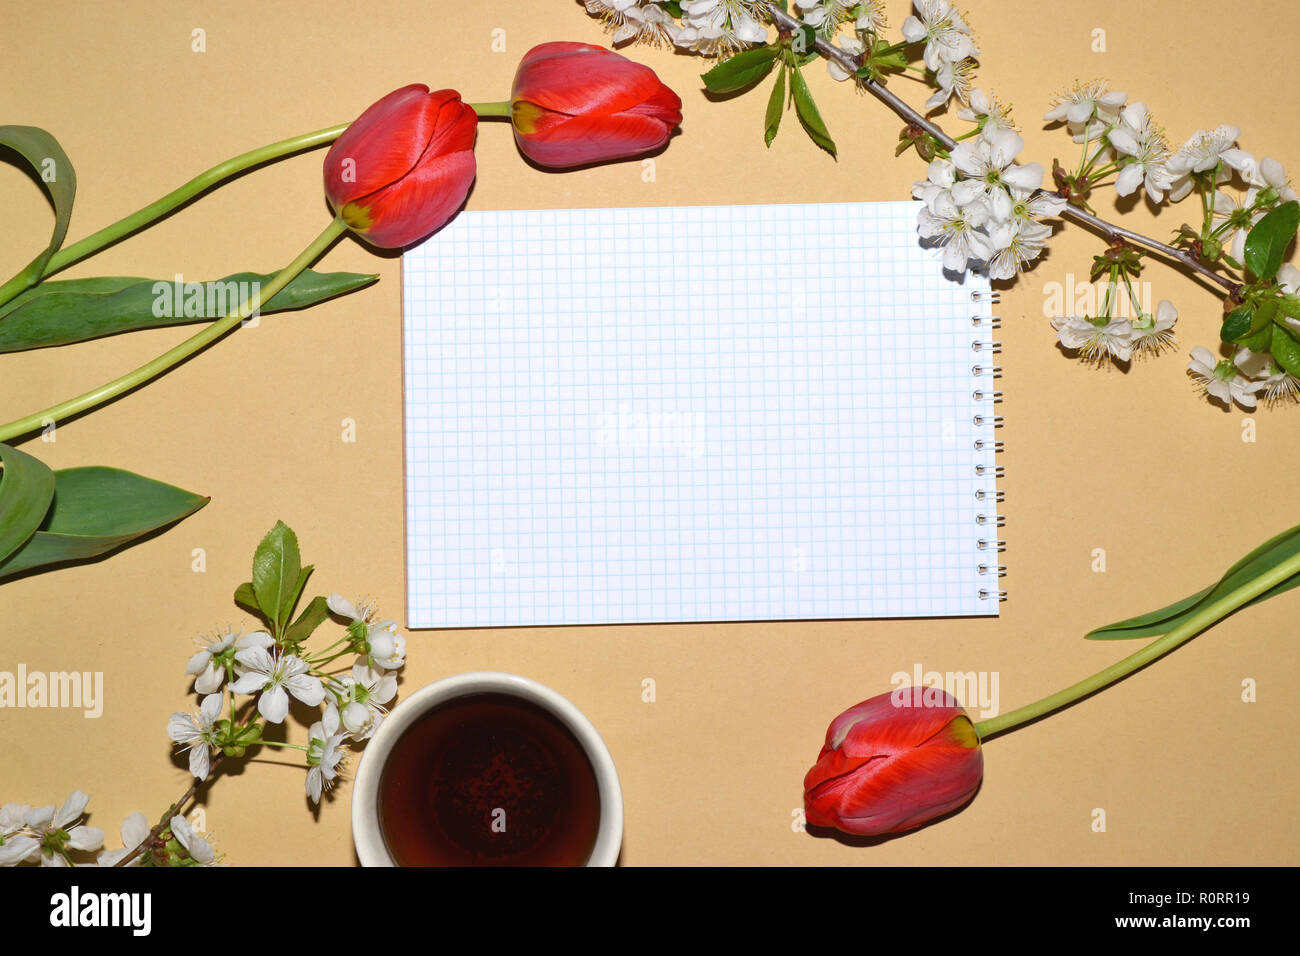 Open Notepad for writing framed with tulips and white flowers, and a Cup of tea. Stock Photo